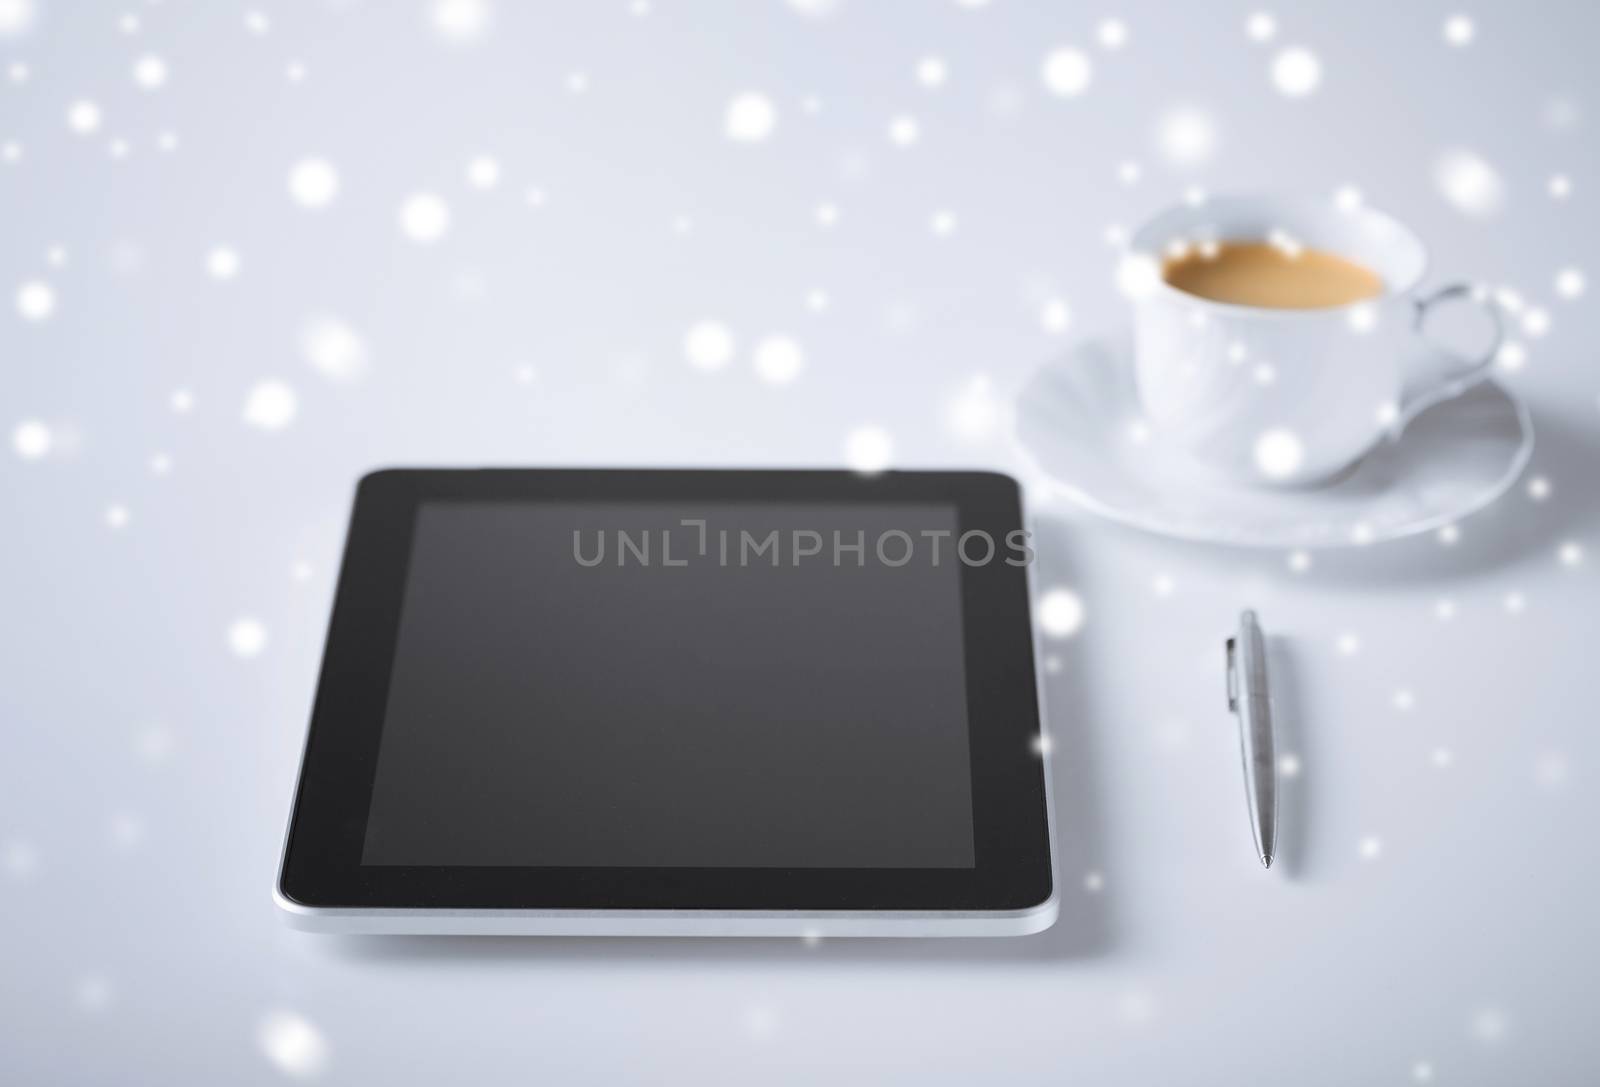 business and technology concept - tablet pc with cup of coffee